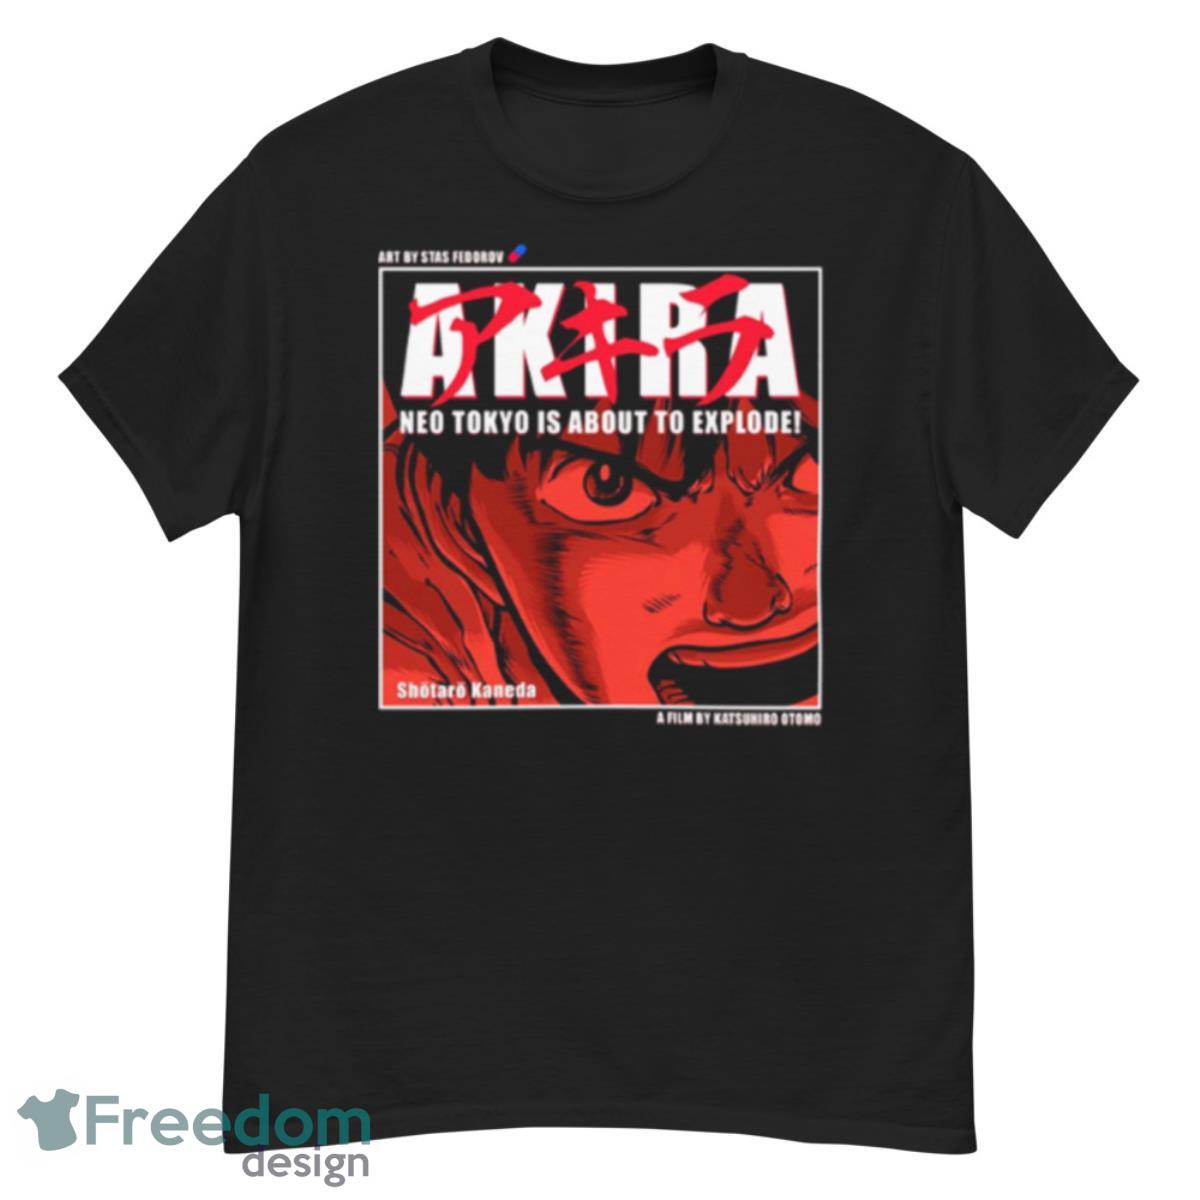 Neo Tokyo Is About To Explode Akira Anime shirt - G500 Men’s Classic T-Shirt